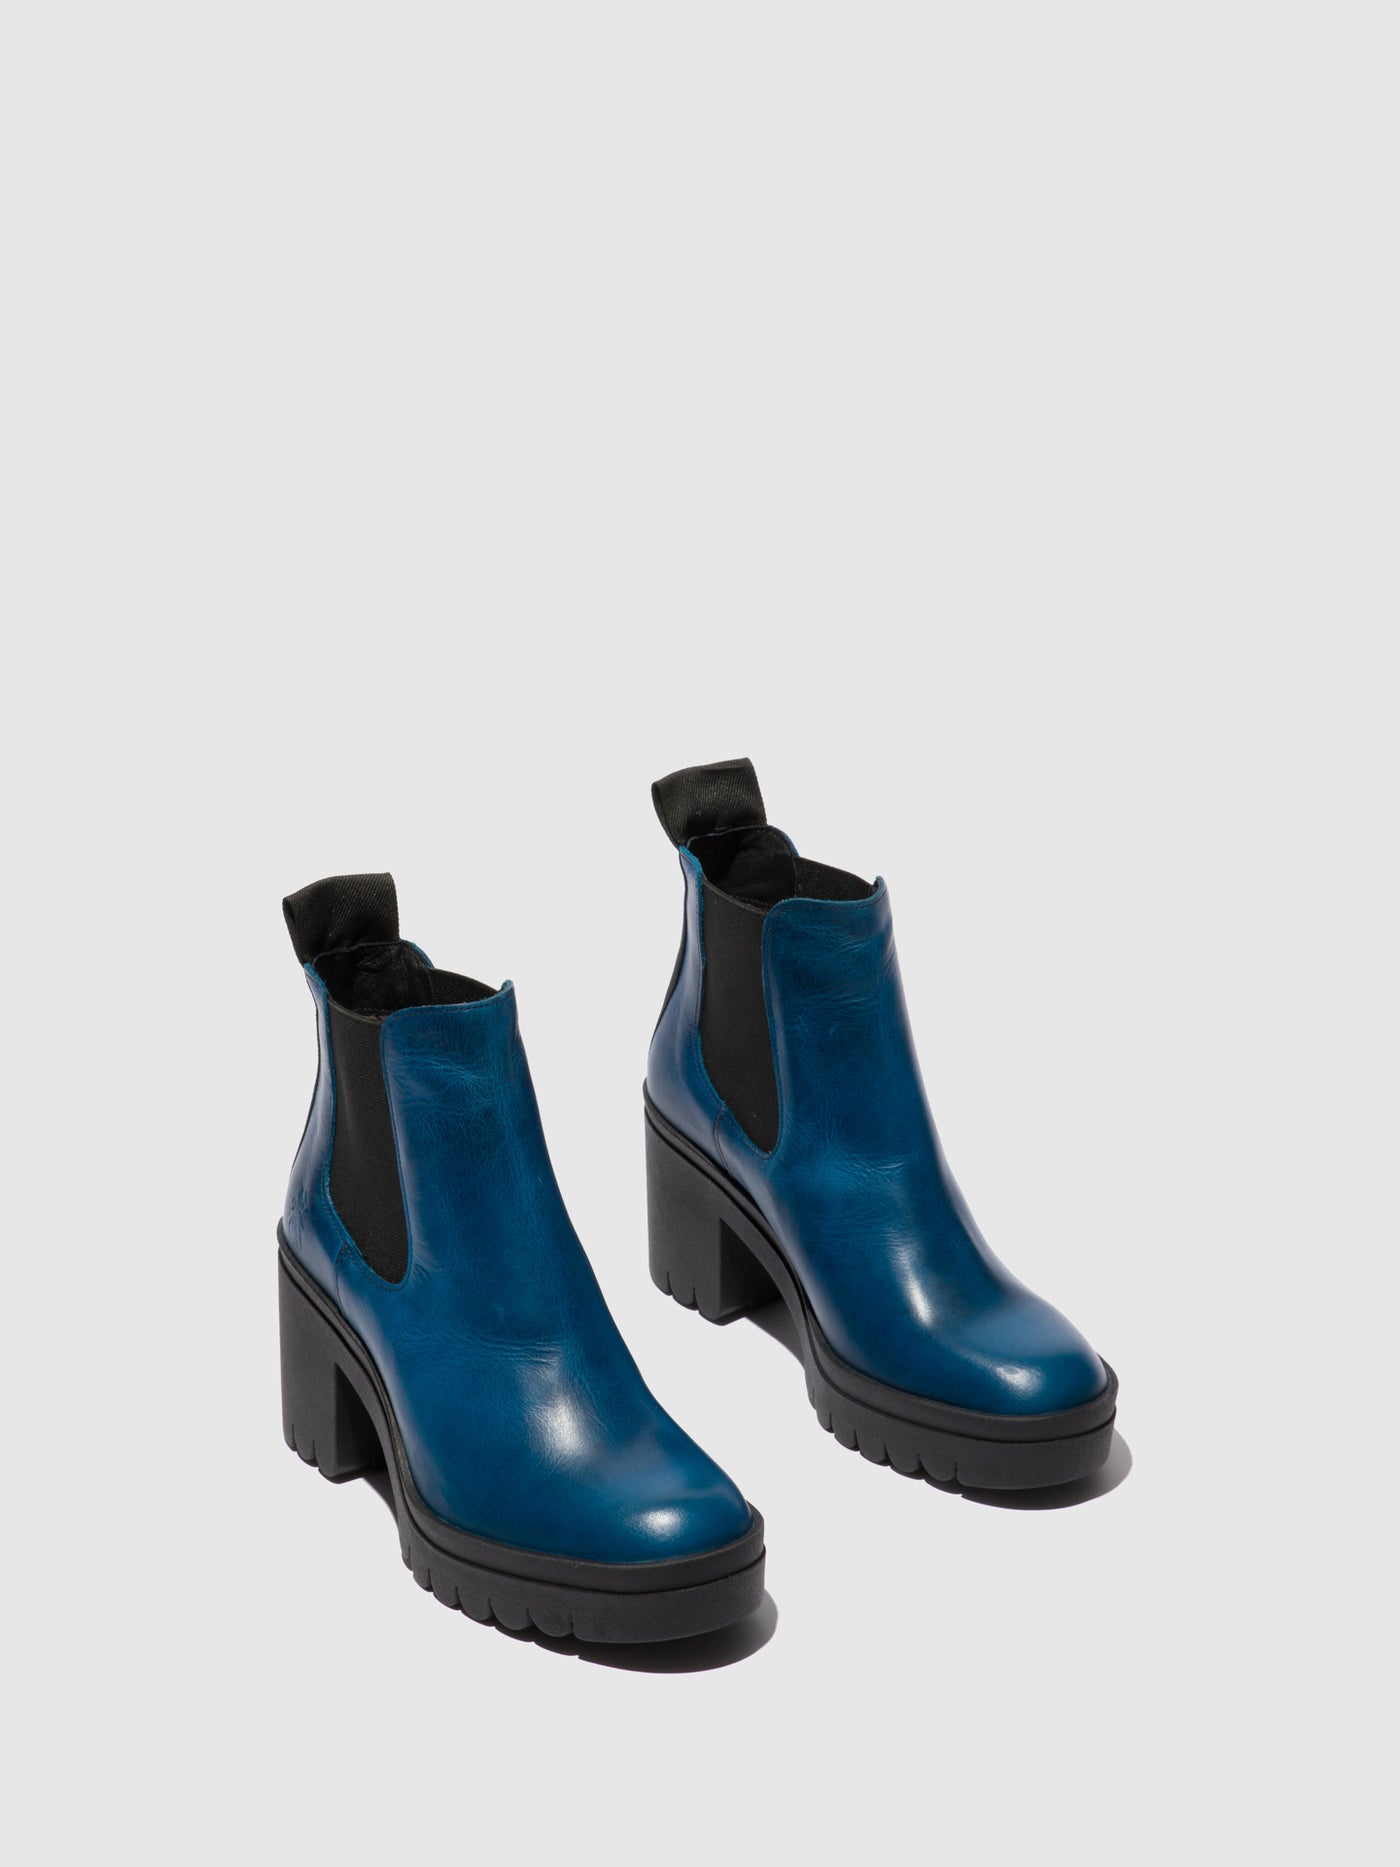 Chelsea Ankle Boots TOPE520FLY RUG ROYAL BLUE